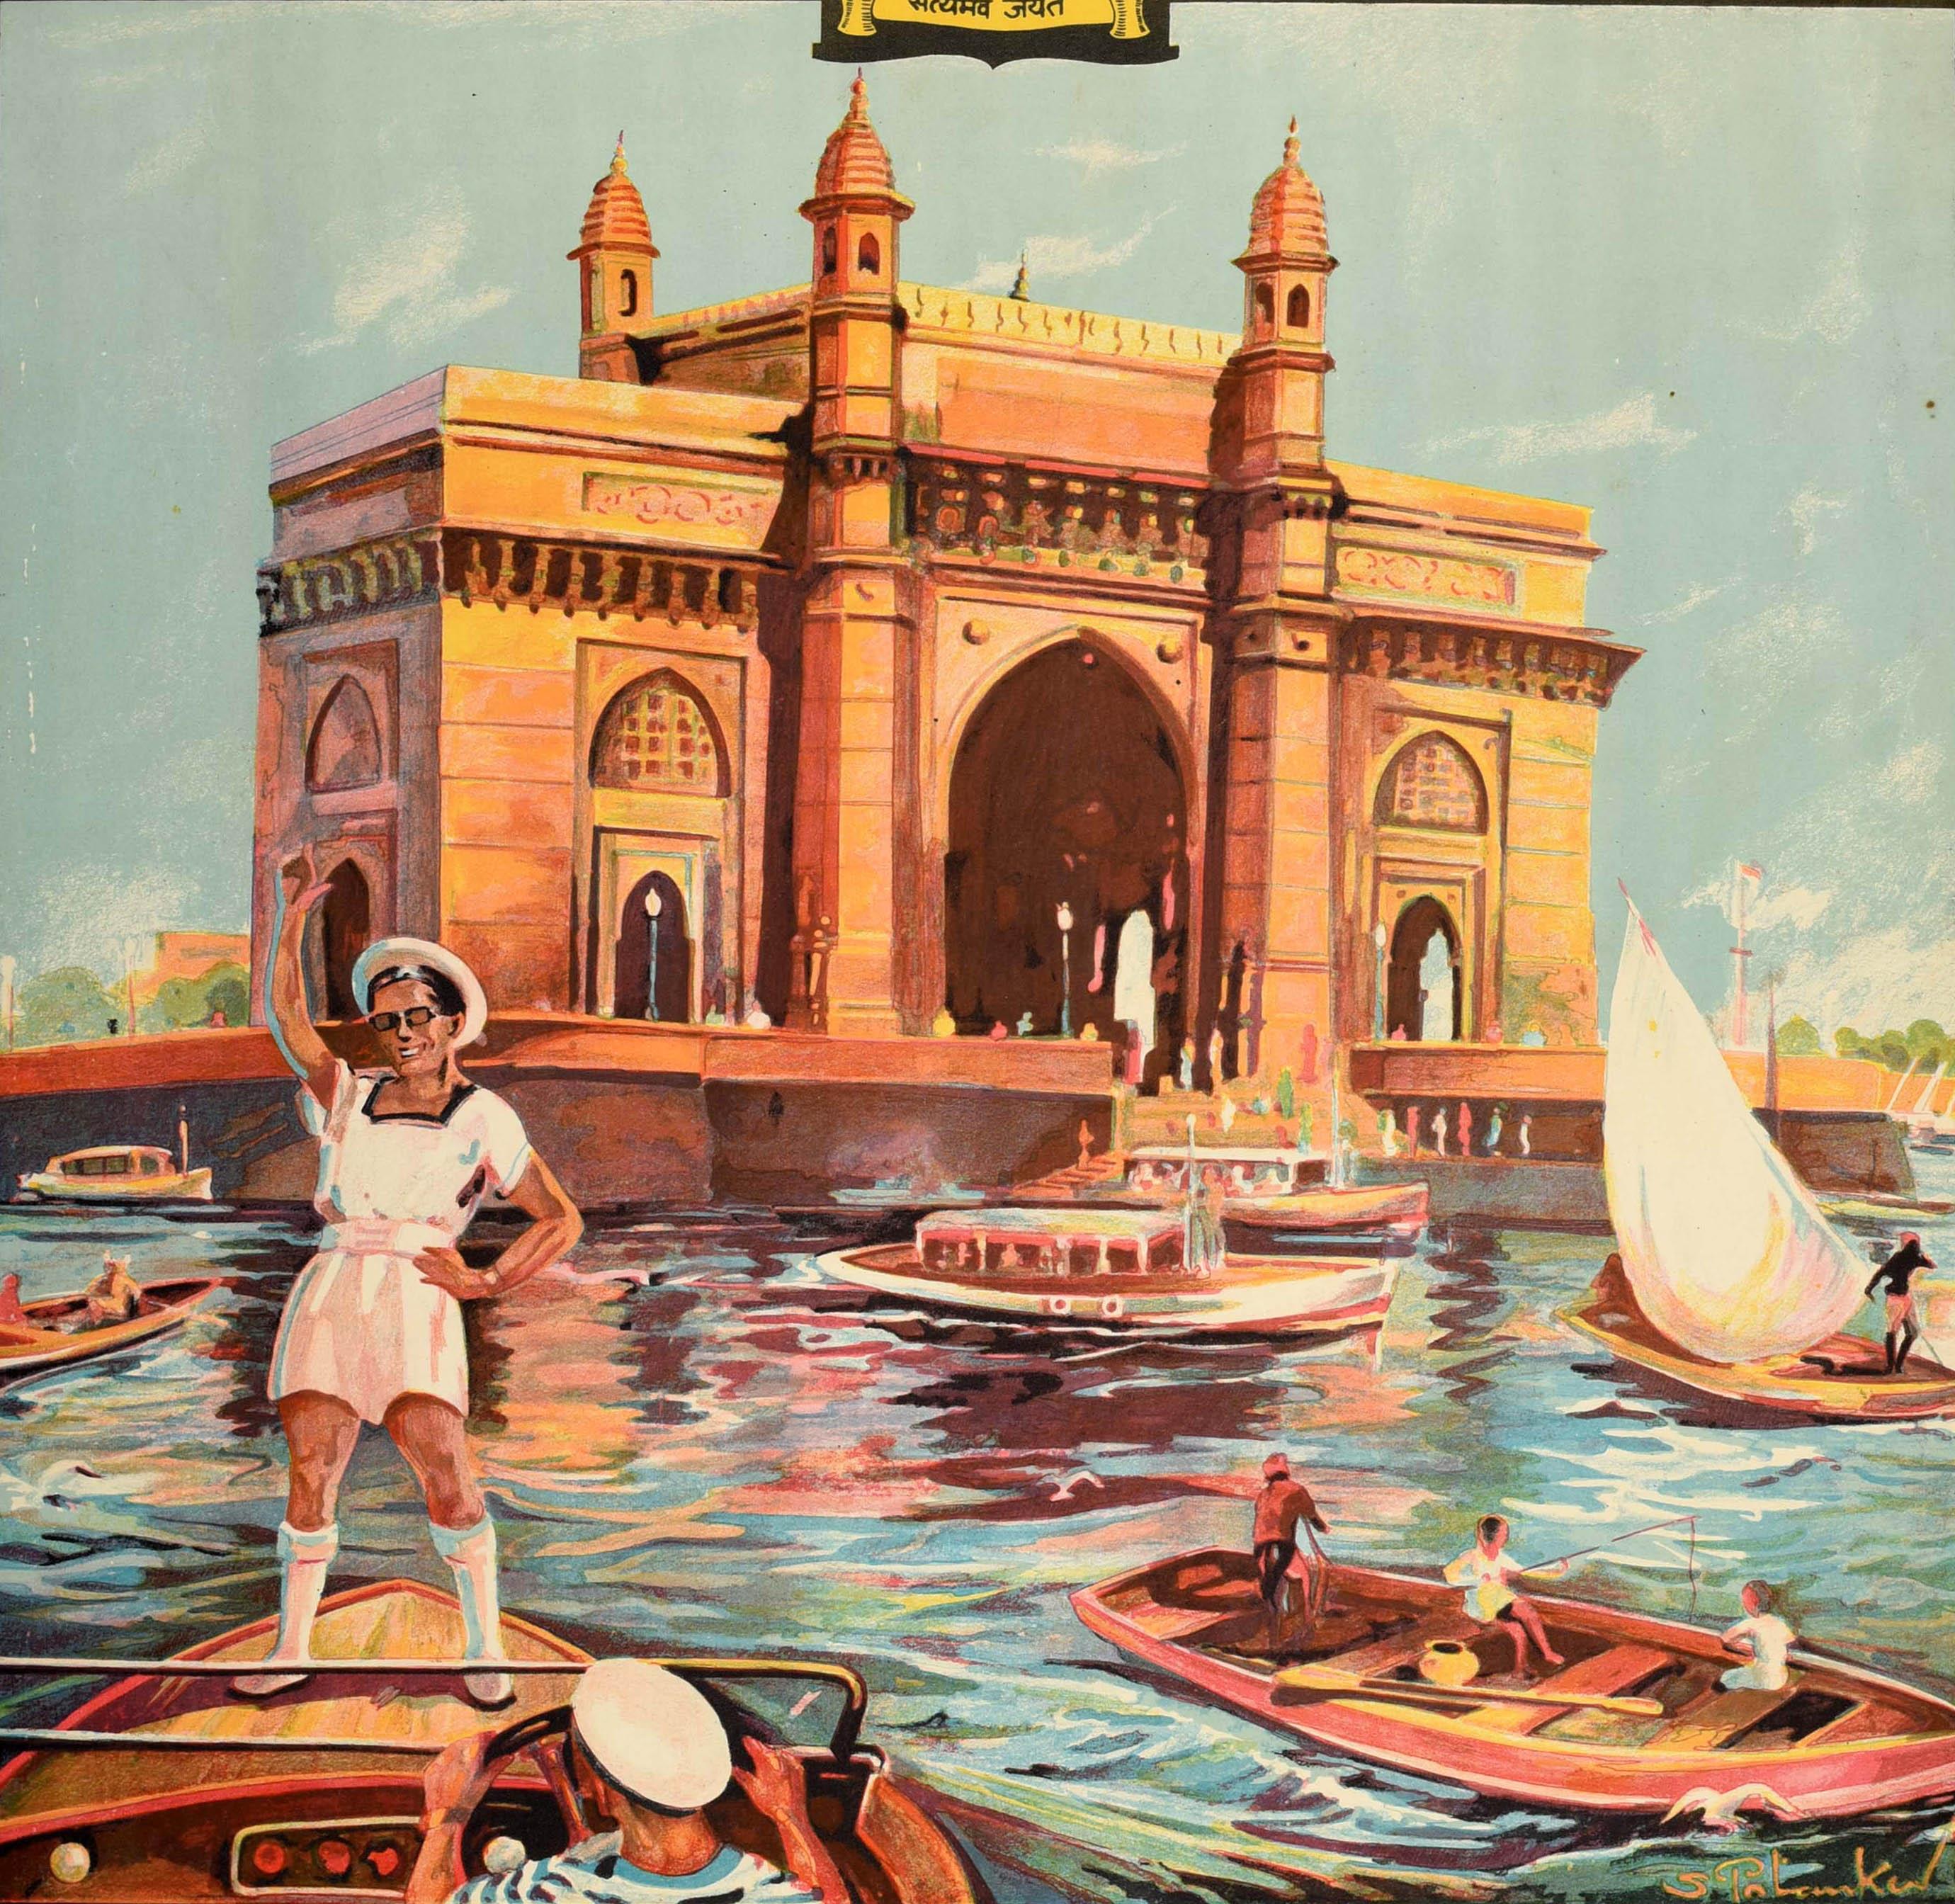 Original vintage travel poster - Visit Bombay for Pleasure or Business - featuring boats sailing at sea on the busy waterfront with the Gateway of India monument in the background, a man in a sailor uniform and sunglasses waving to the viewer whilst